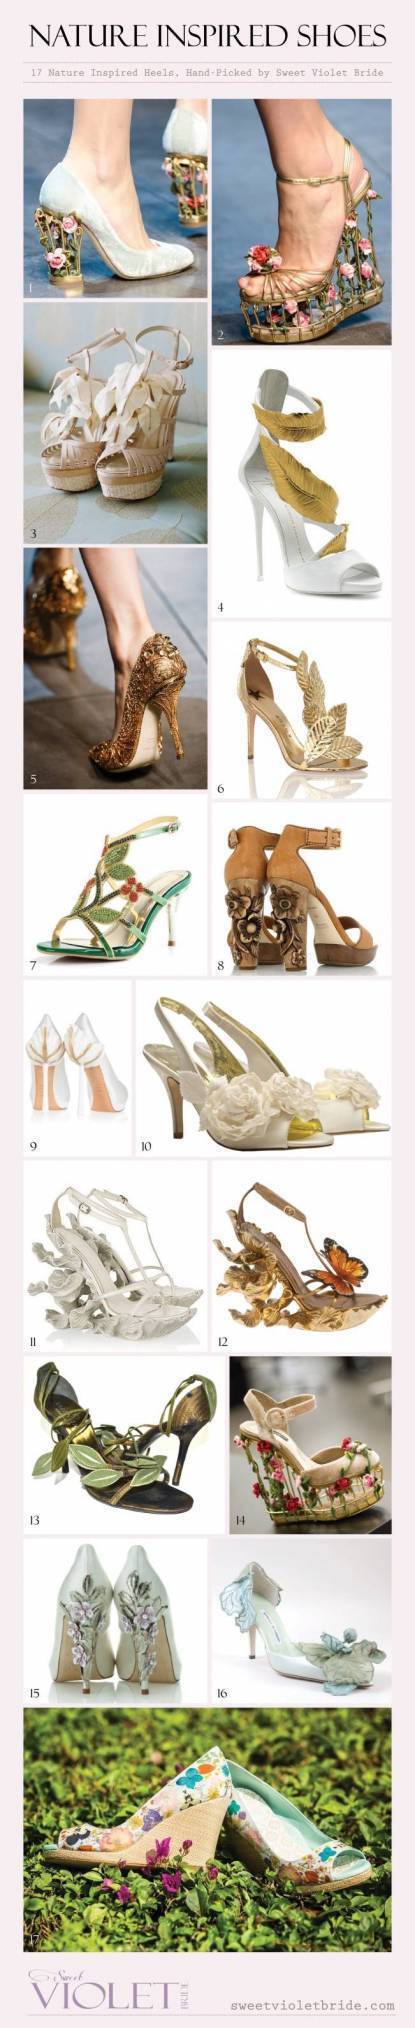 17 Wedding-Worthy Nature Inspired Shoes